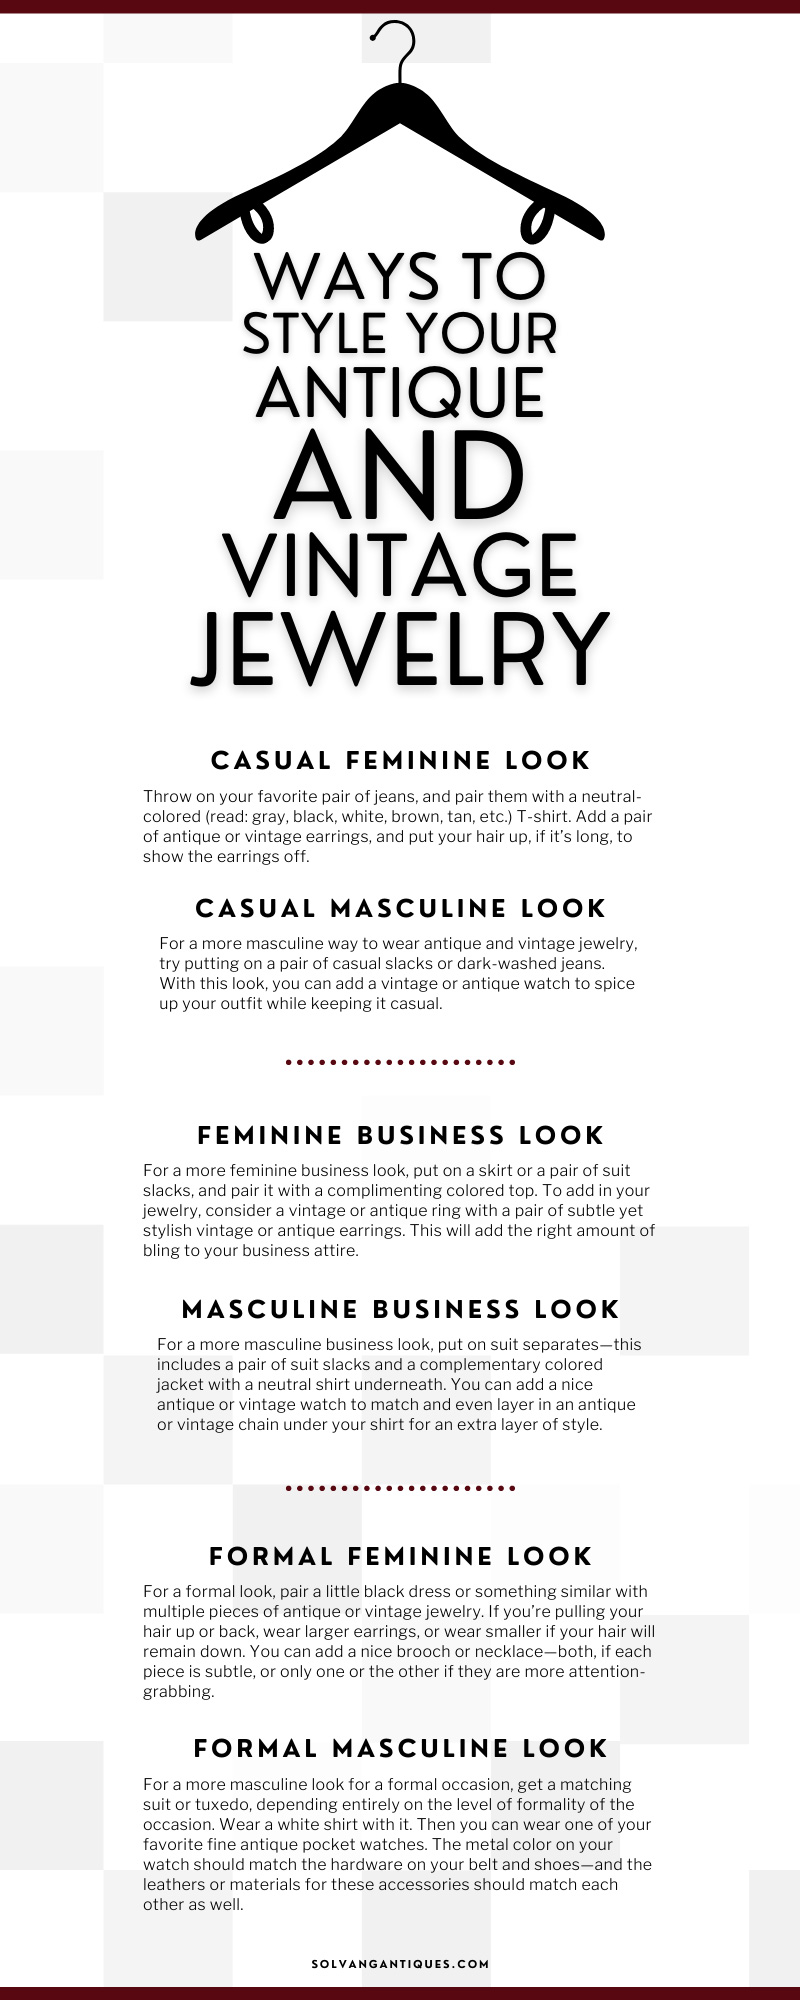 Style Your Antique and Vintage Jewelry